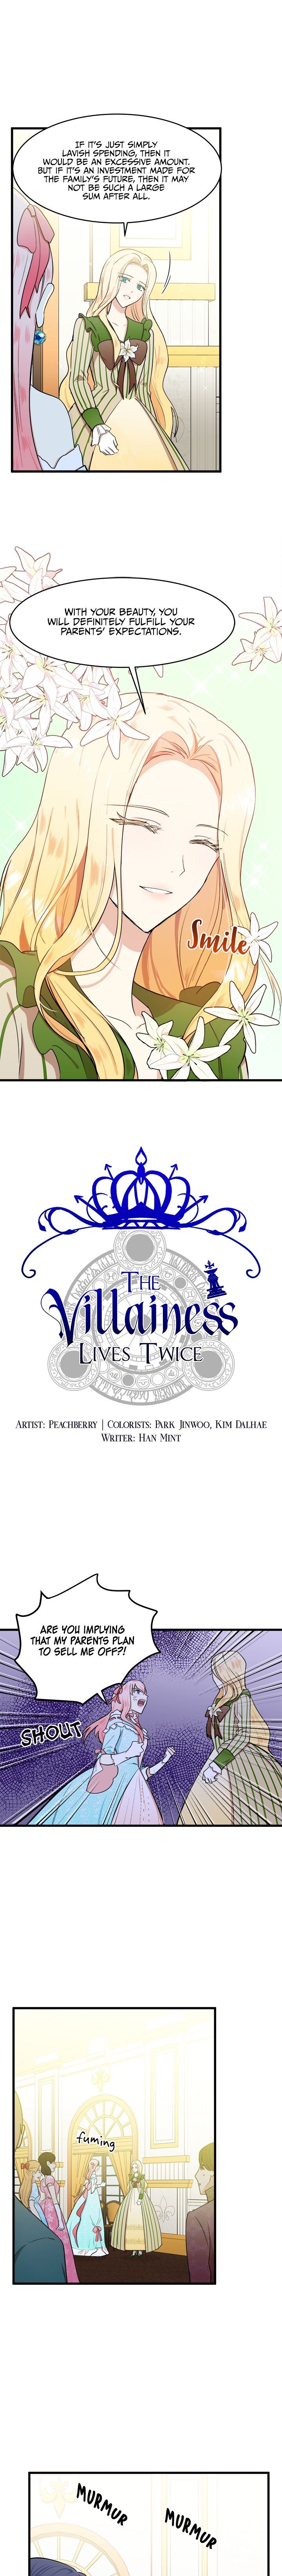 the_villainess_lives_twice_12_5